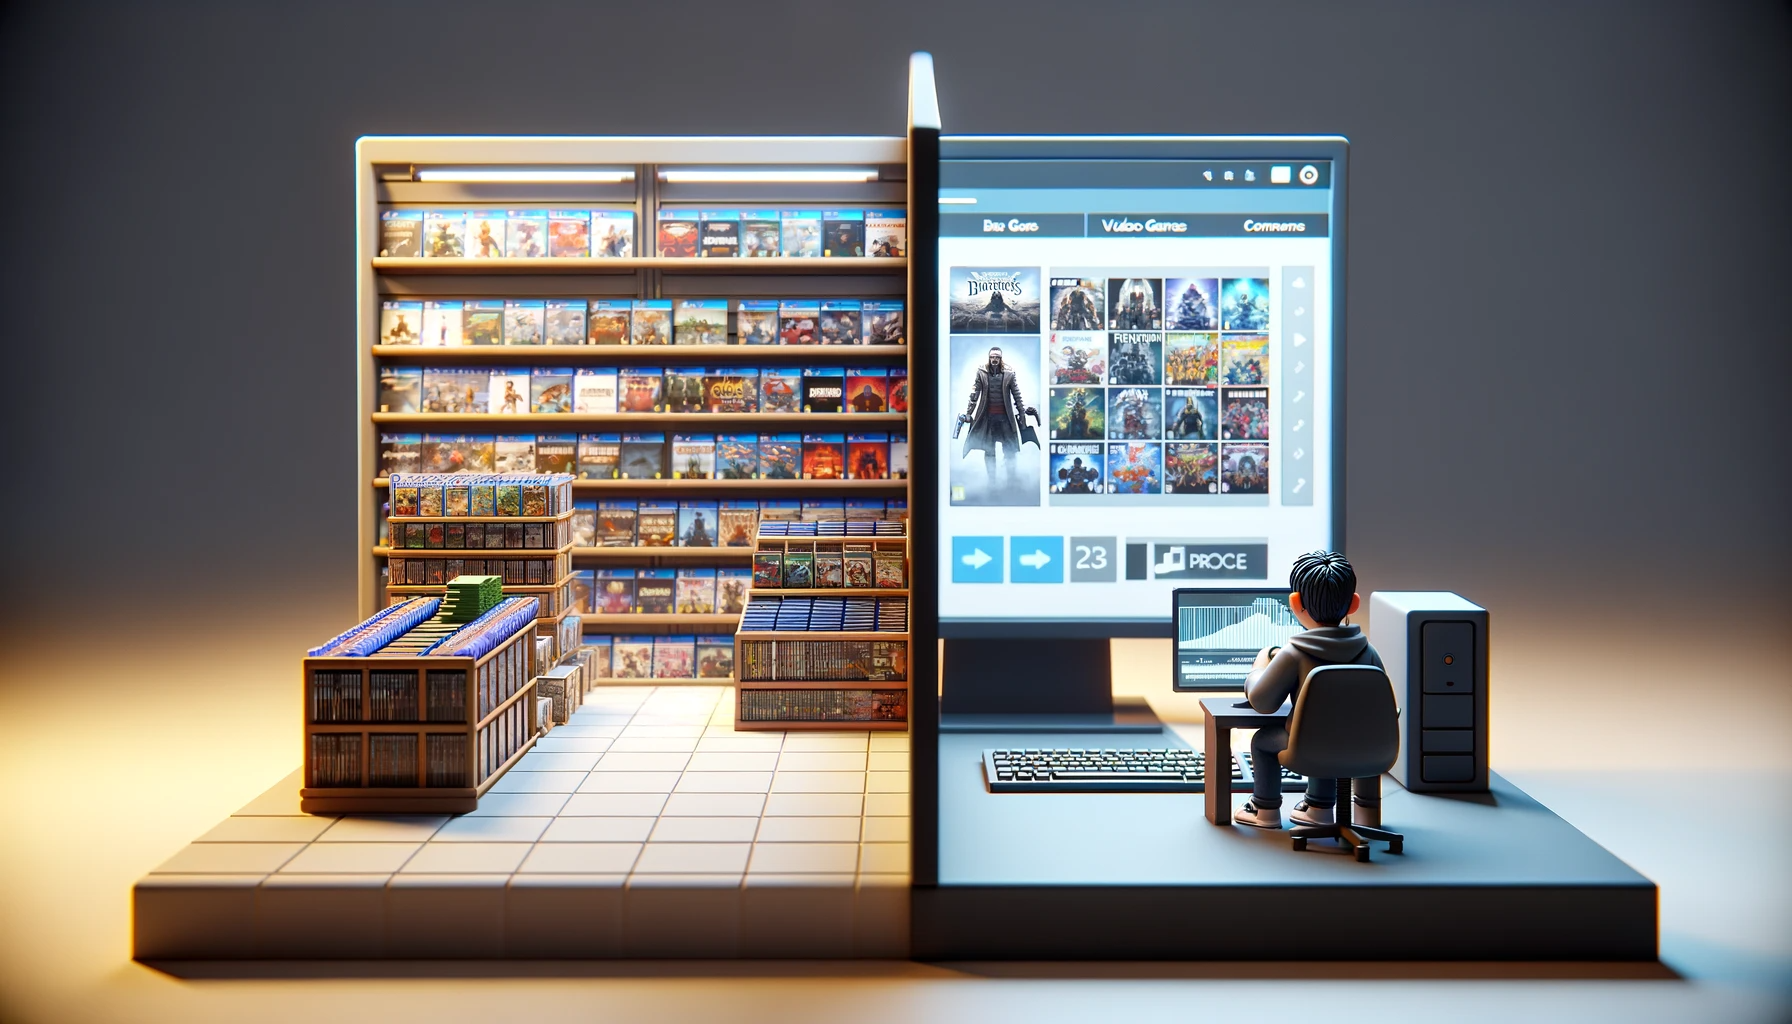  3D-rendered image featuring a split view showcasing a physical video game store and a digital game store interface 